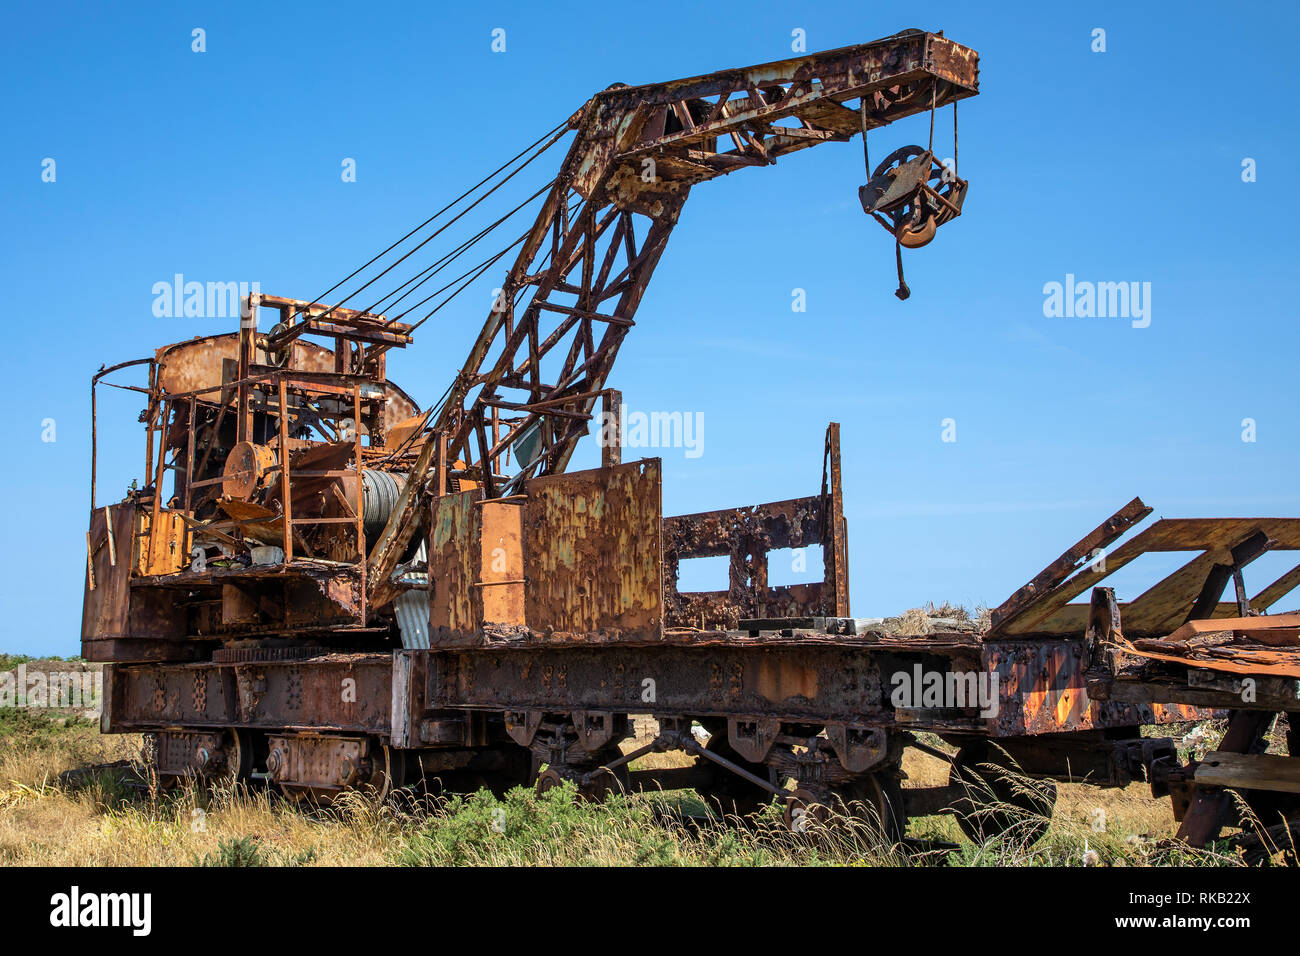 The old railway track crane in Mannez Quarry in Alderney Stock Photo